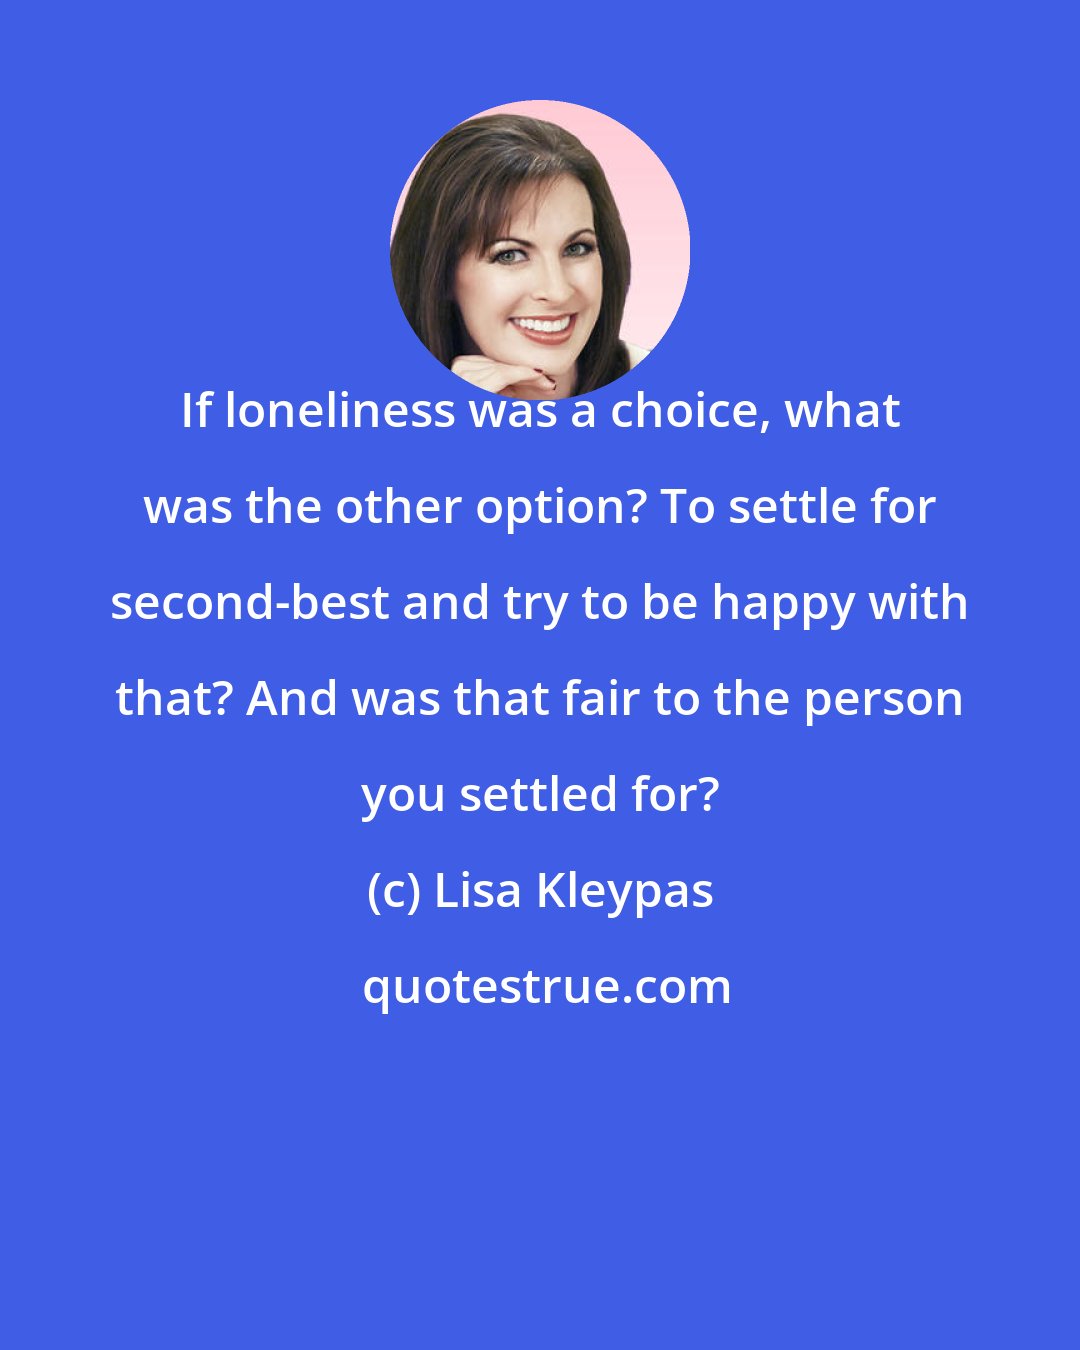 Lisa Kleypas: If loneliness was a choice, what was the other option? To settle for second-best and try to be happy with that? And was that fair to the person you settled for?